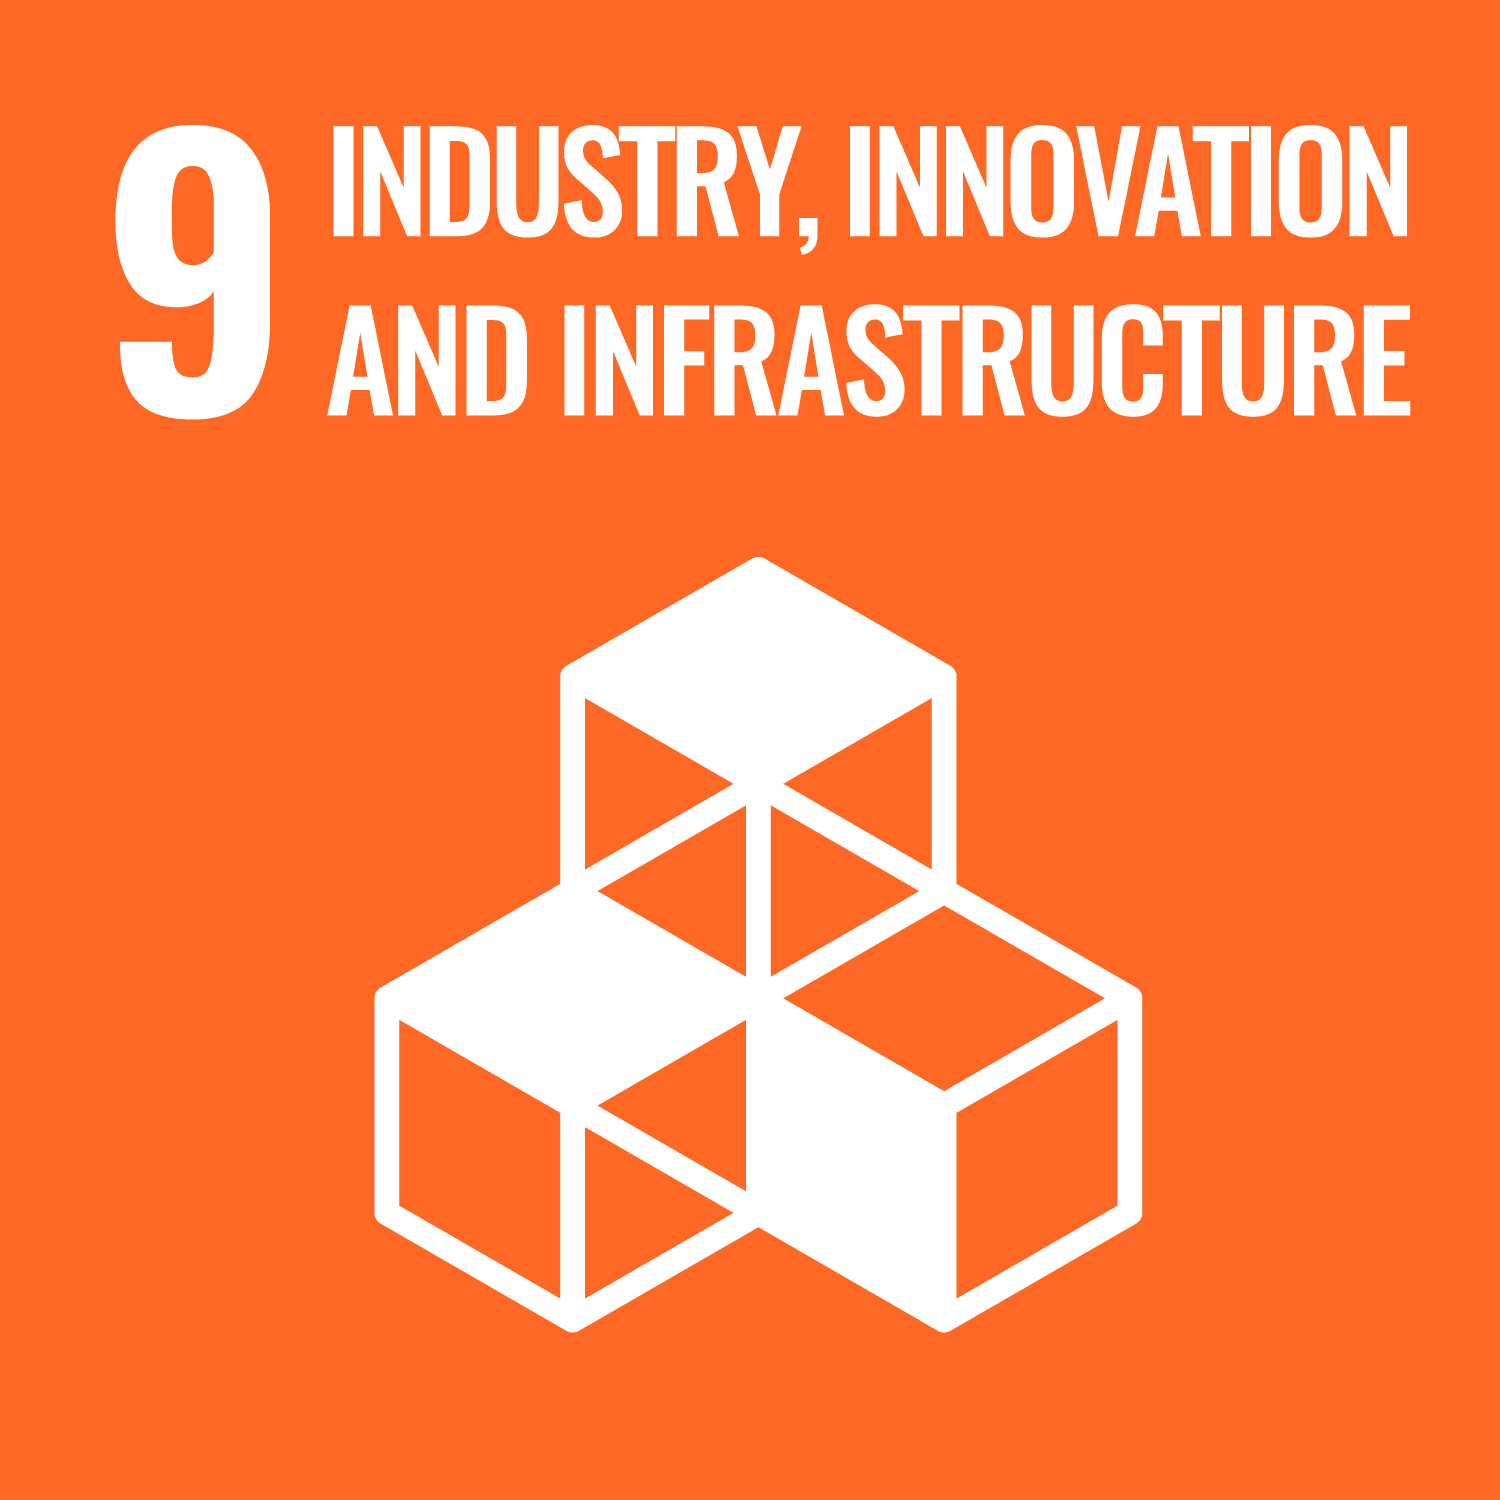 Graphic image of three stacked blocks with text saying '9 industry, innovation and infrastructure' reflecting Sustainable Development Goal (SDG) or Global Goal 9